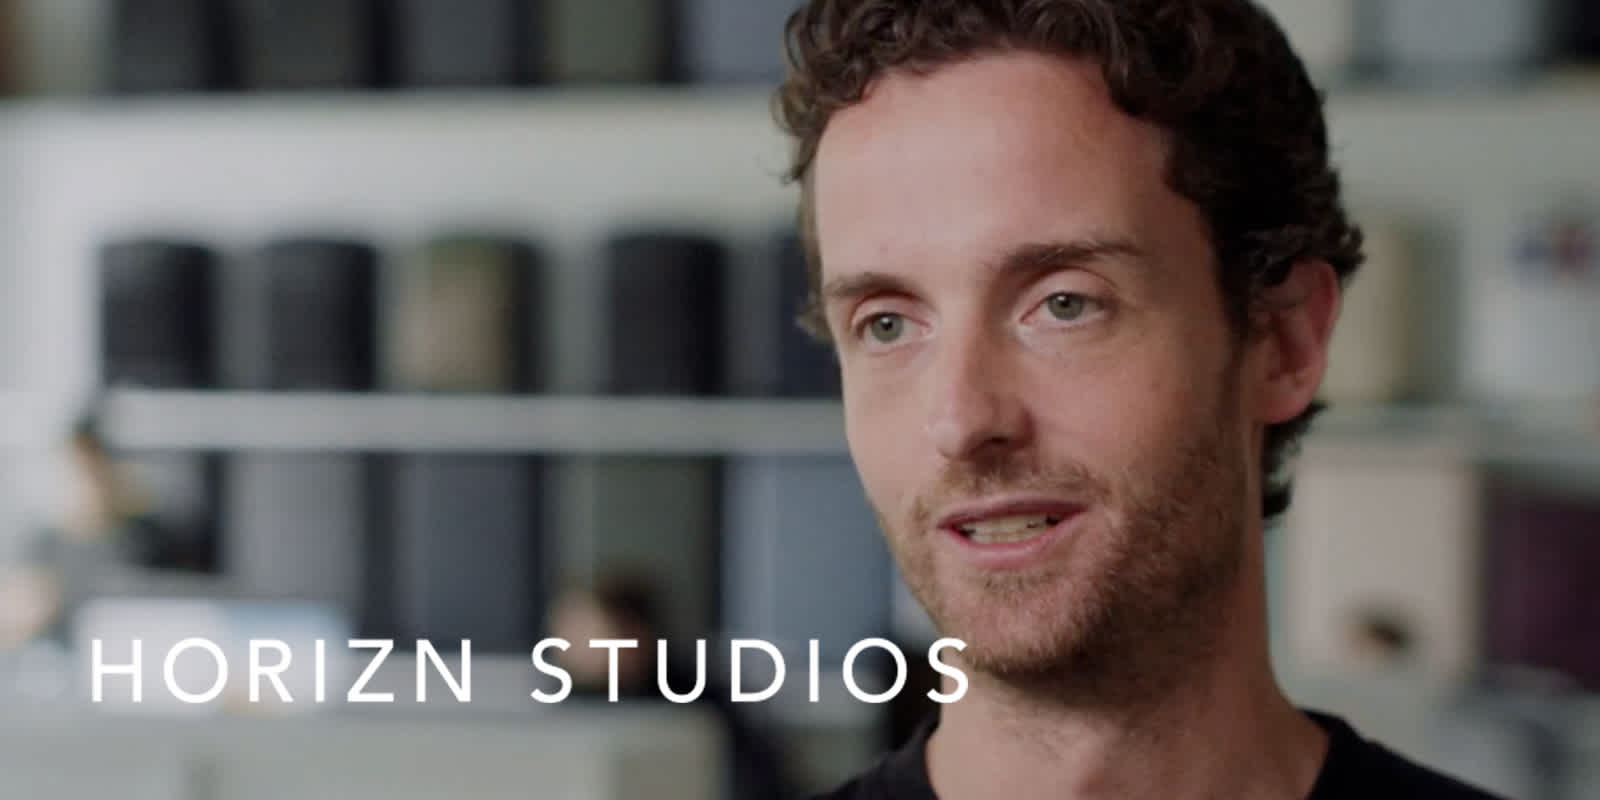 Travel Brand Horizn Studios Takes Off with Simplified Operations